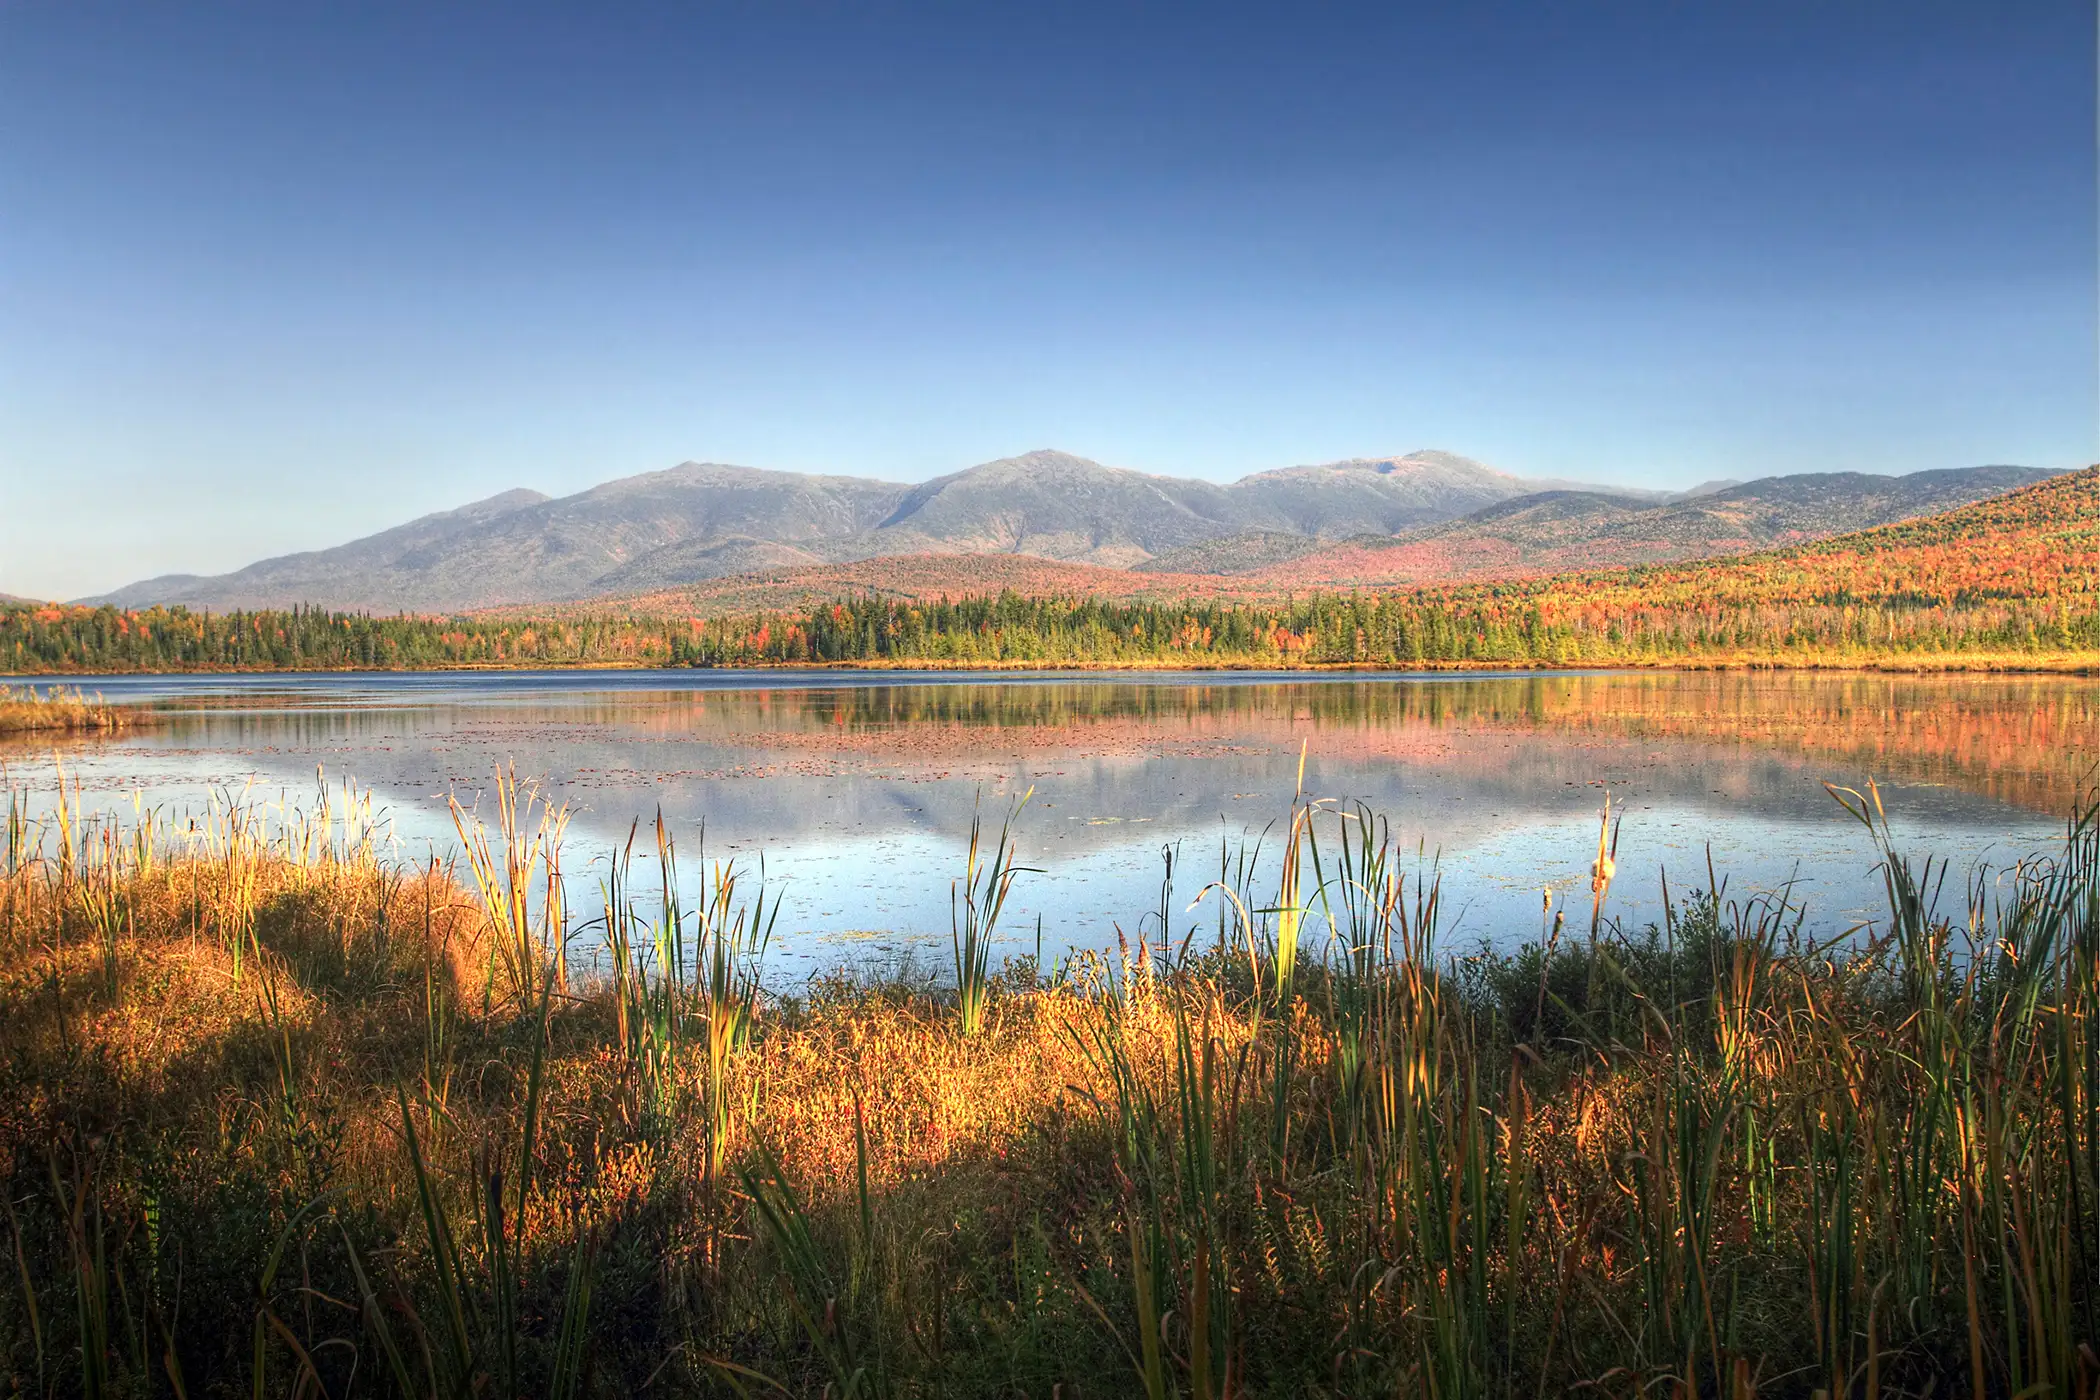 A view across Cherry Pond or Pondicherry with White Mountains Presidential range in background.